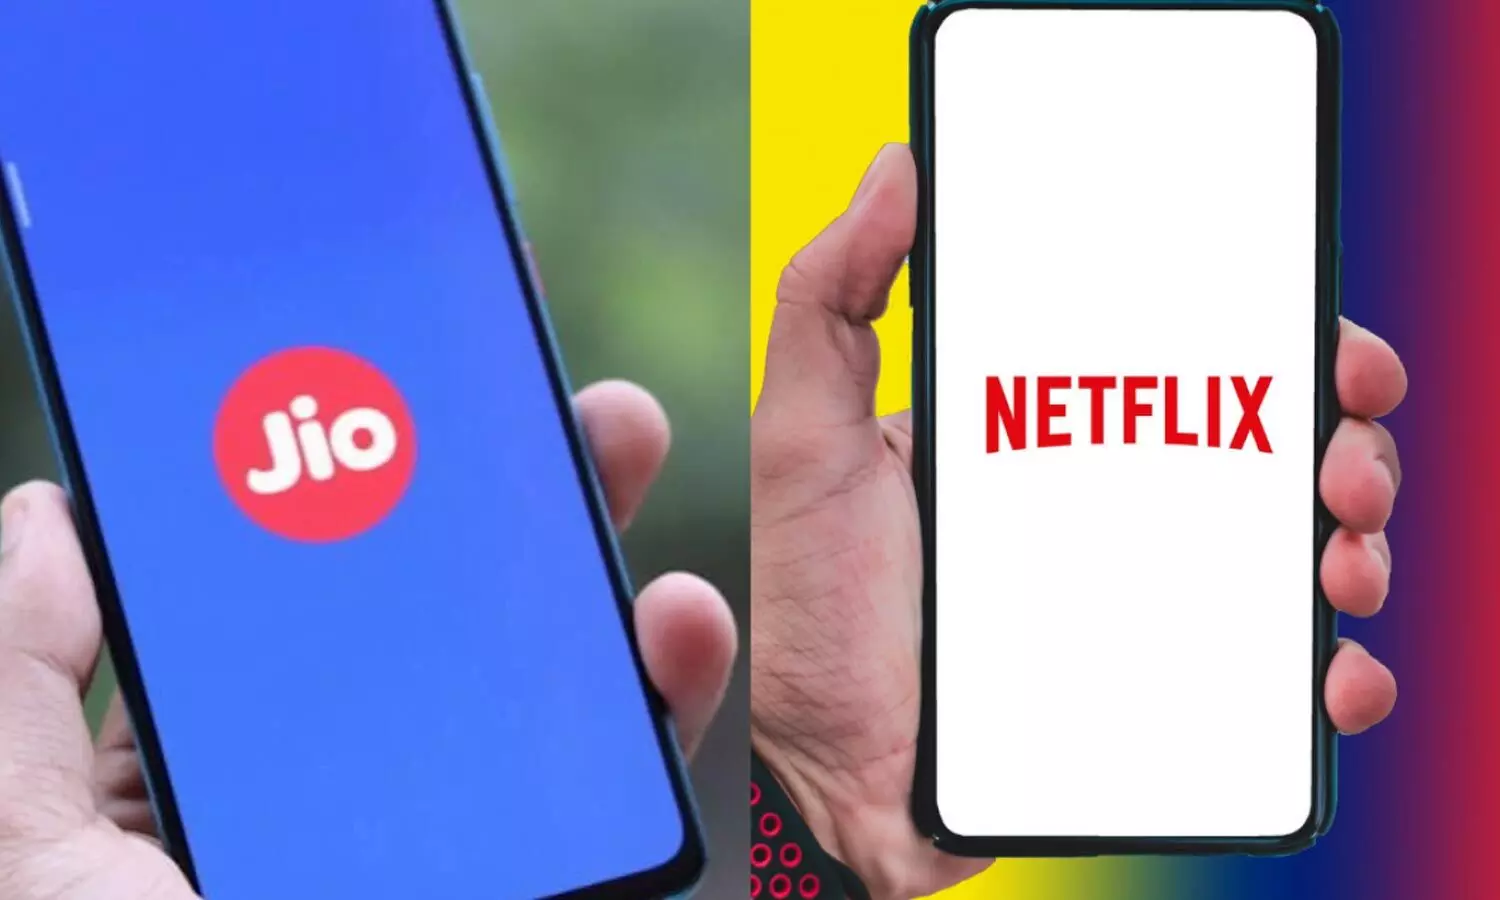 Jio offers free Netflix subscription with these postpaid plans